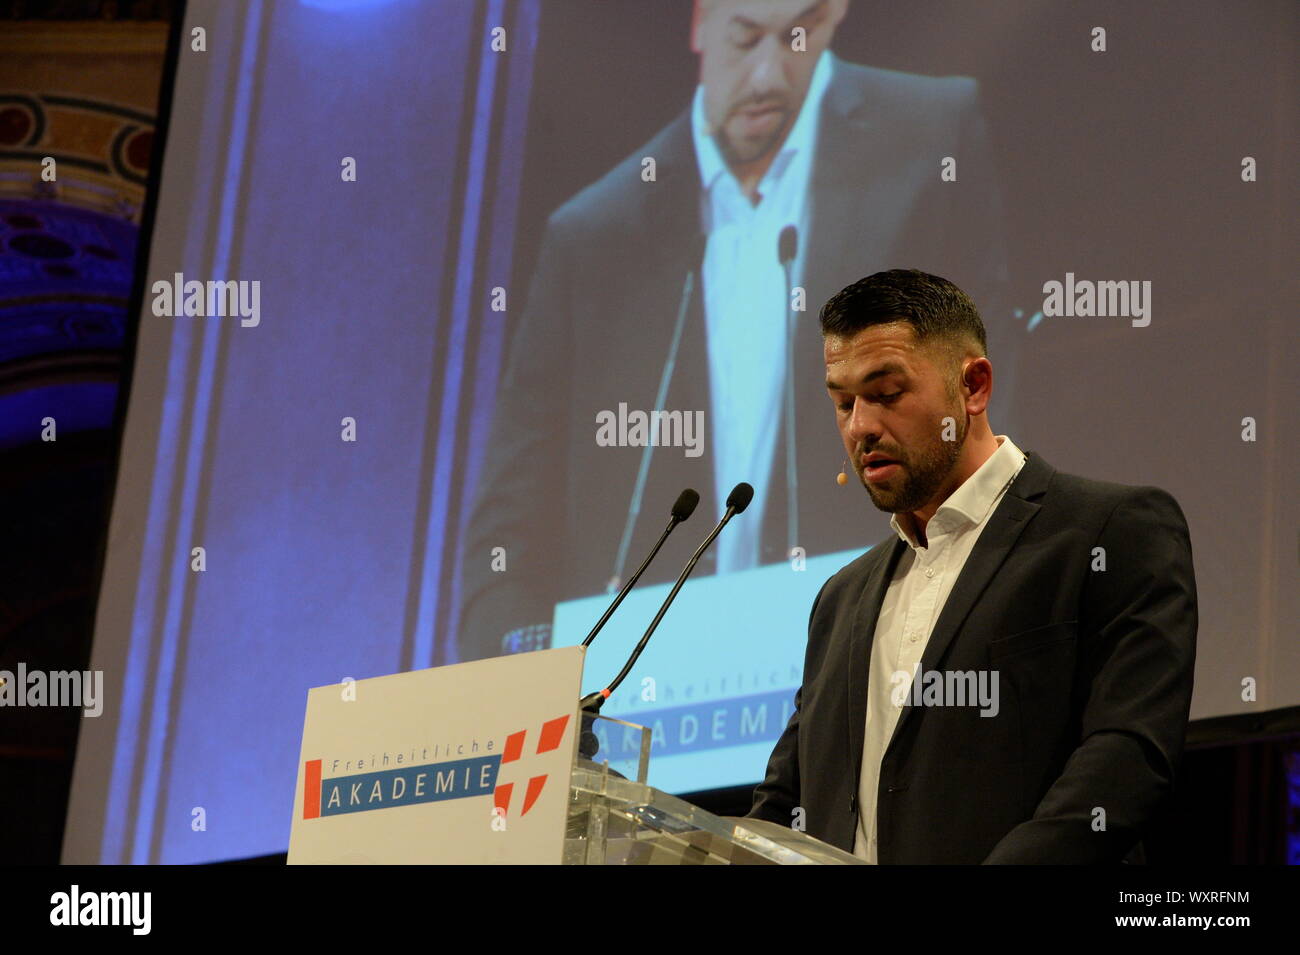 Vienna, Austria. 17th September 2019. Panel Discussion of the Vienna Freedom Academy on Political Islam. 'Political Islam as a challenge for internal security' with ex-jihadist, author and advisor Irfan Peci at the Palais Ferstel in Vienna on 17 September 2019. Credit: Franz Perc/Alamy Live News Stock Photo